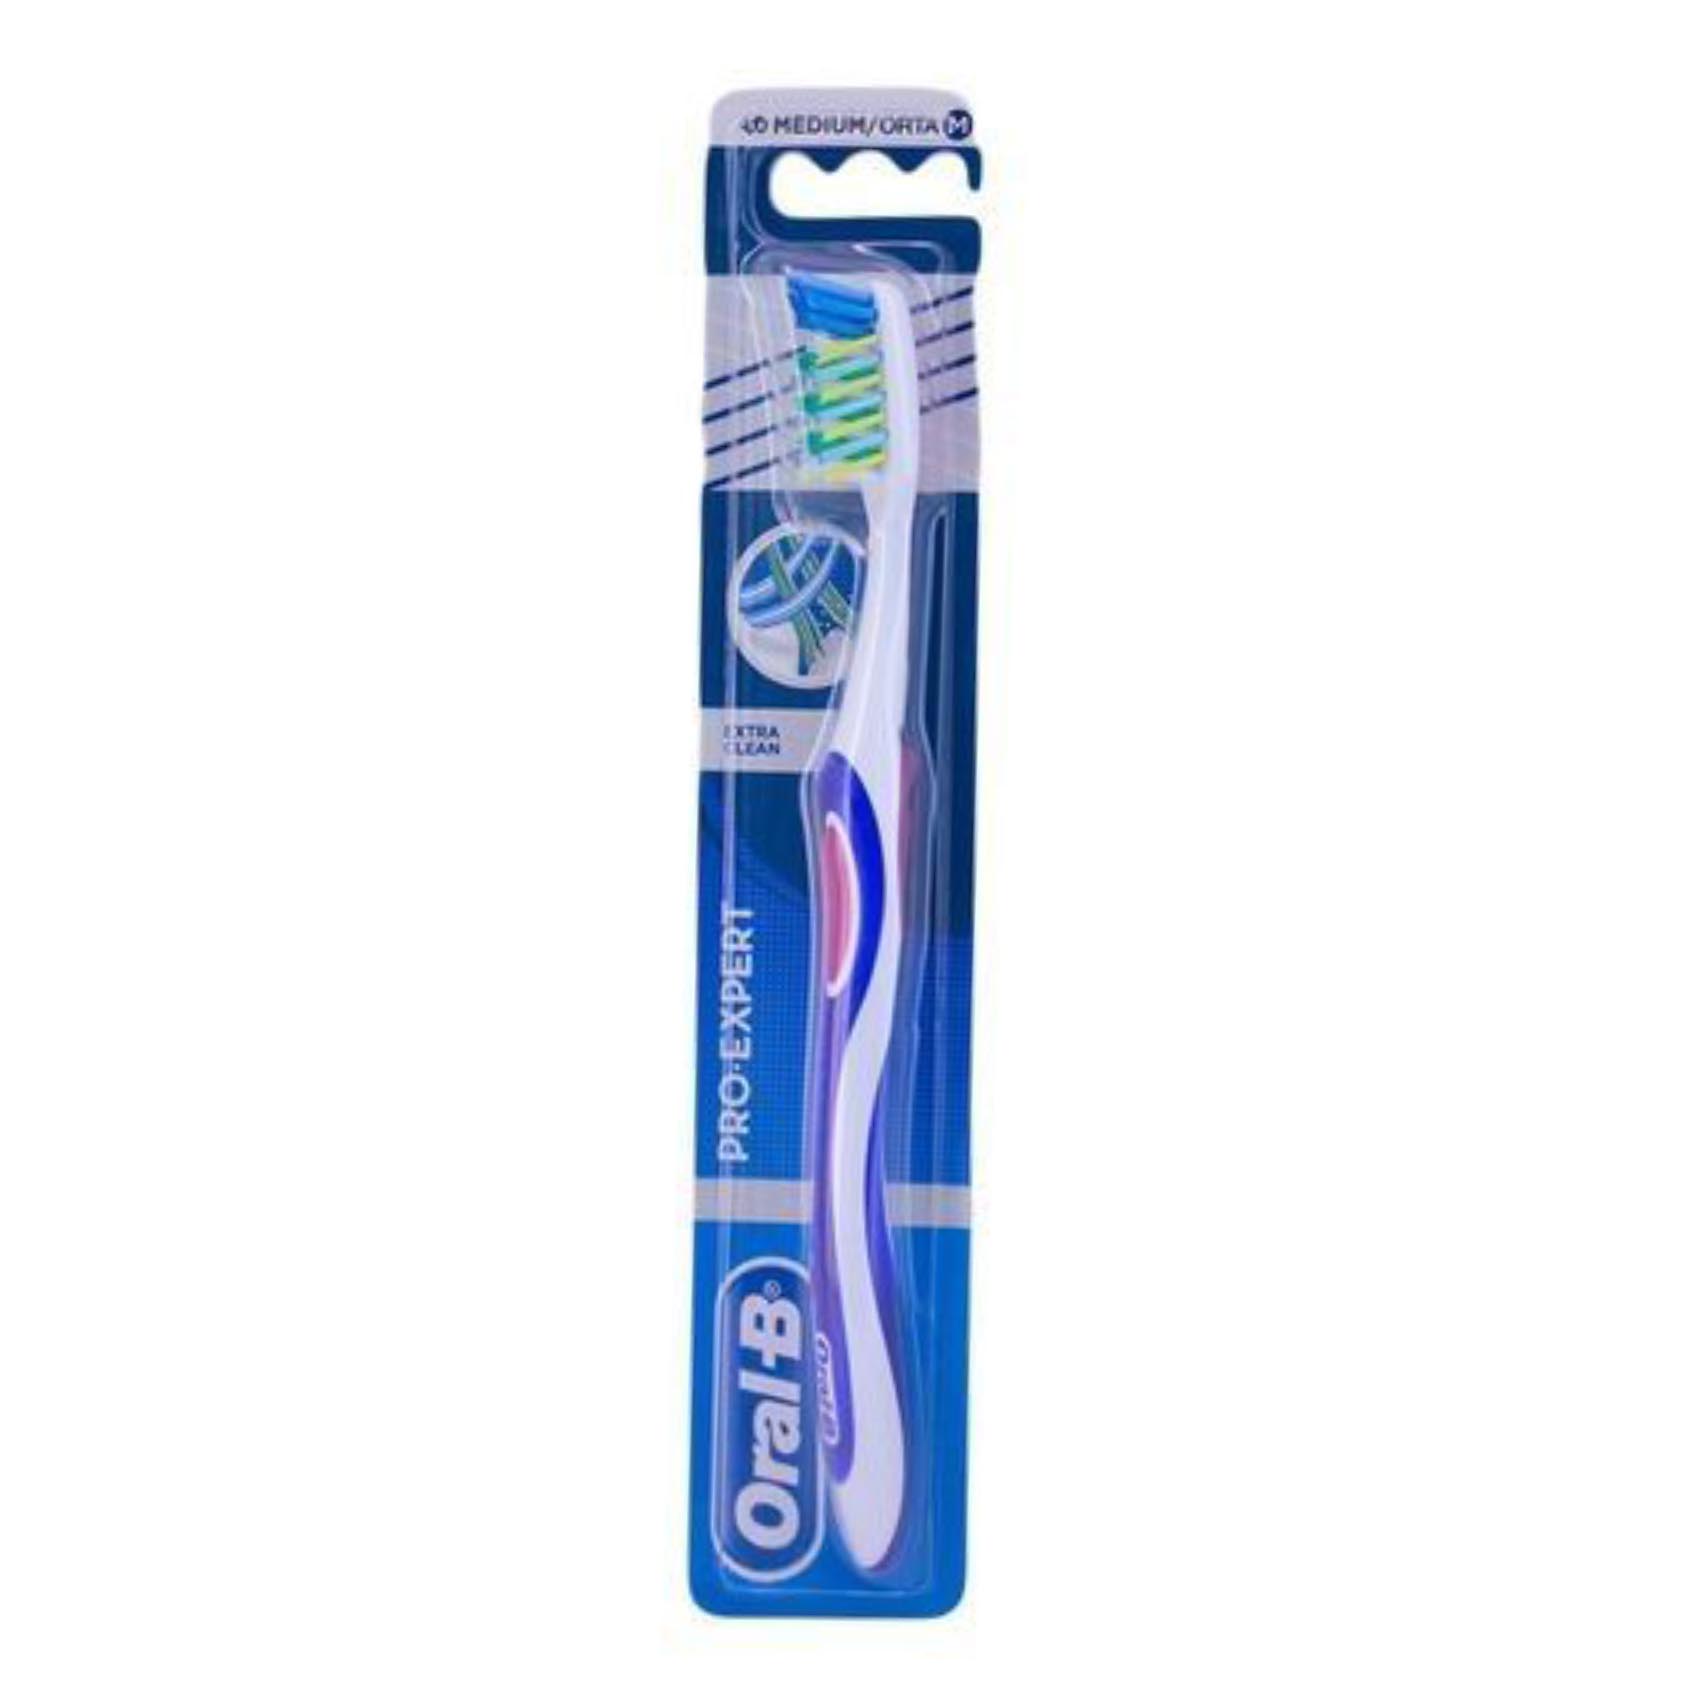 Oral-B Pro-Expert Extra Clean Toothbrush